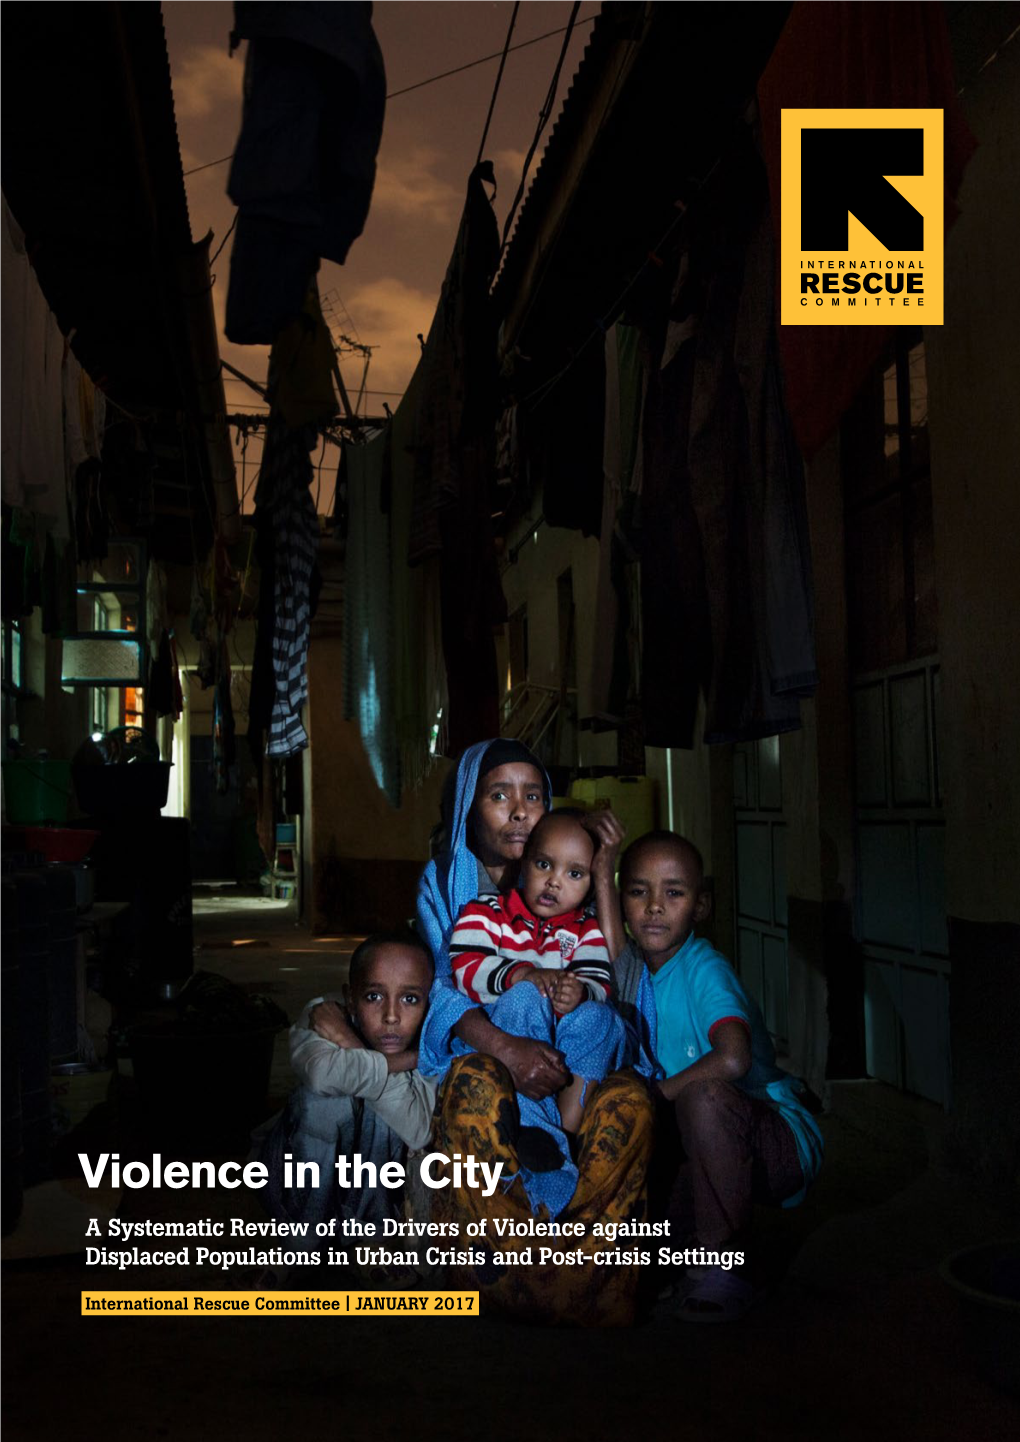 Violence in the City a Systematic Review of the Drivers of Violence Against Displaced Populations in Urban Crisis and Post-Crisis Settings